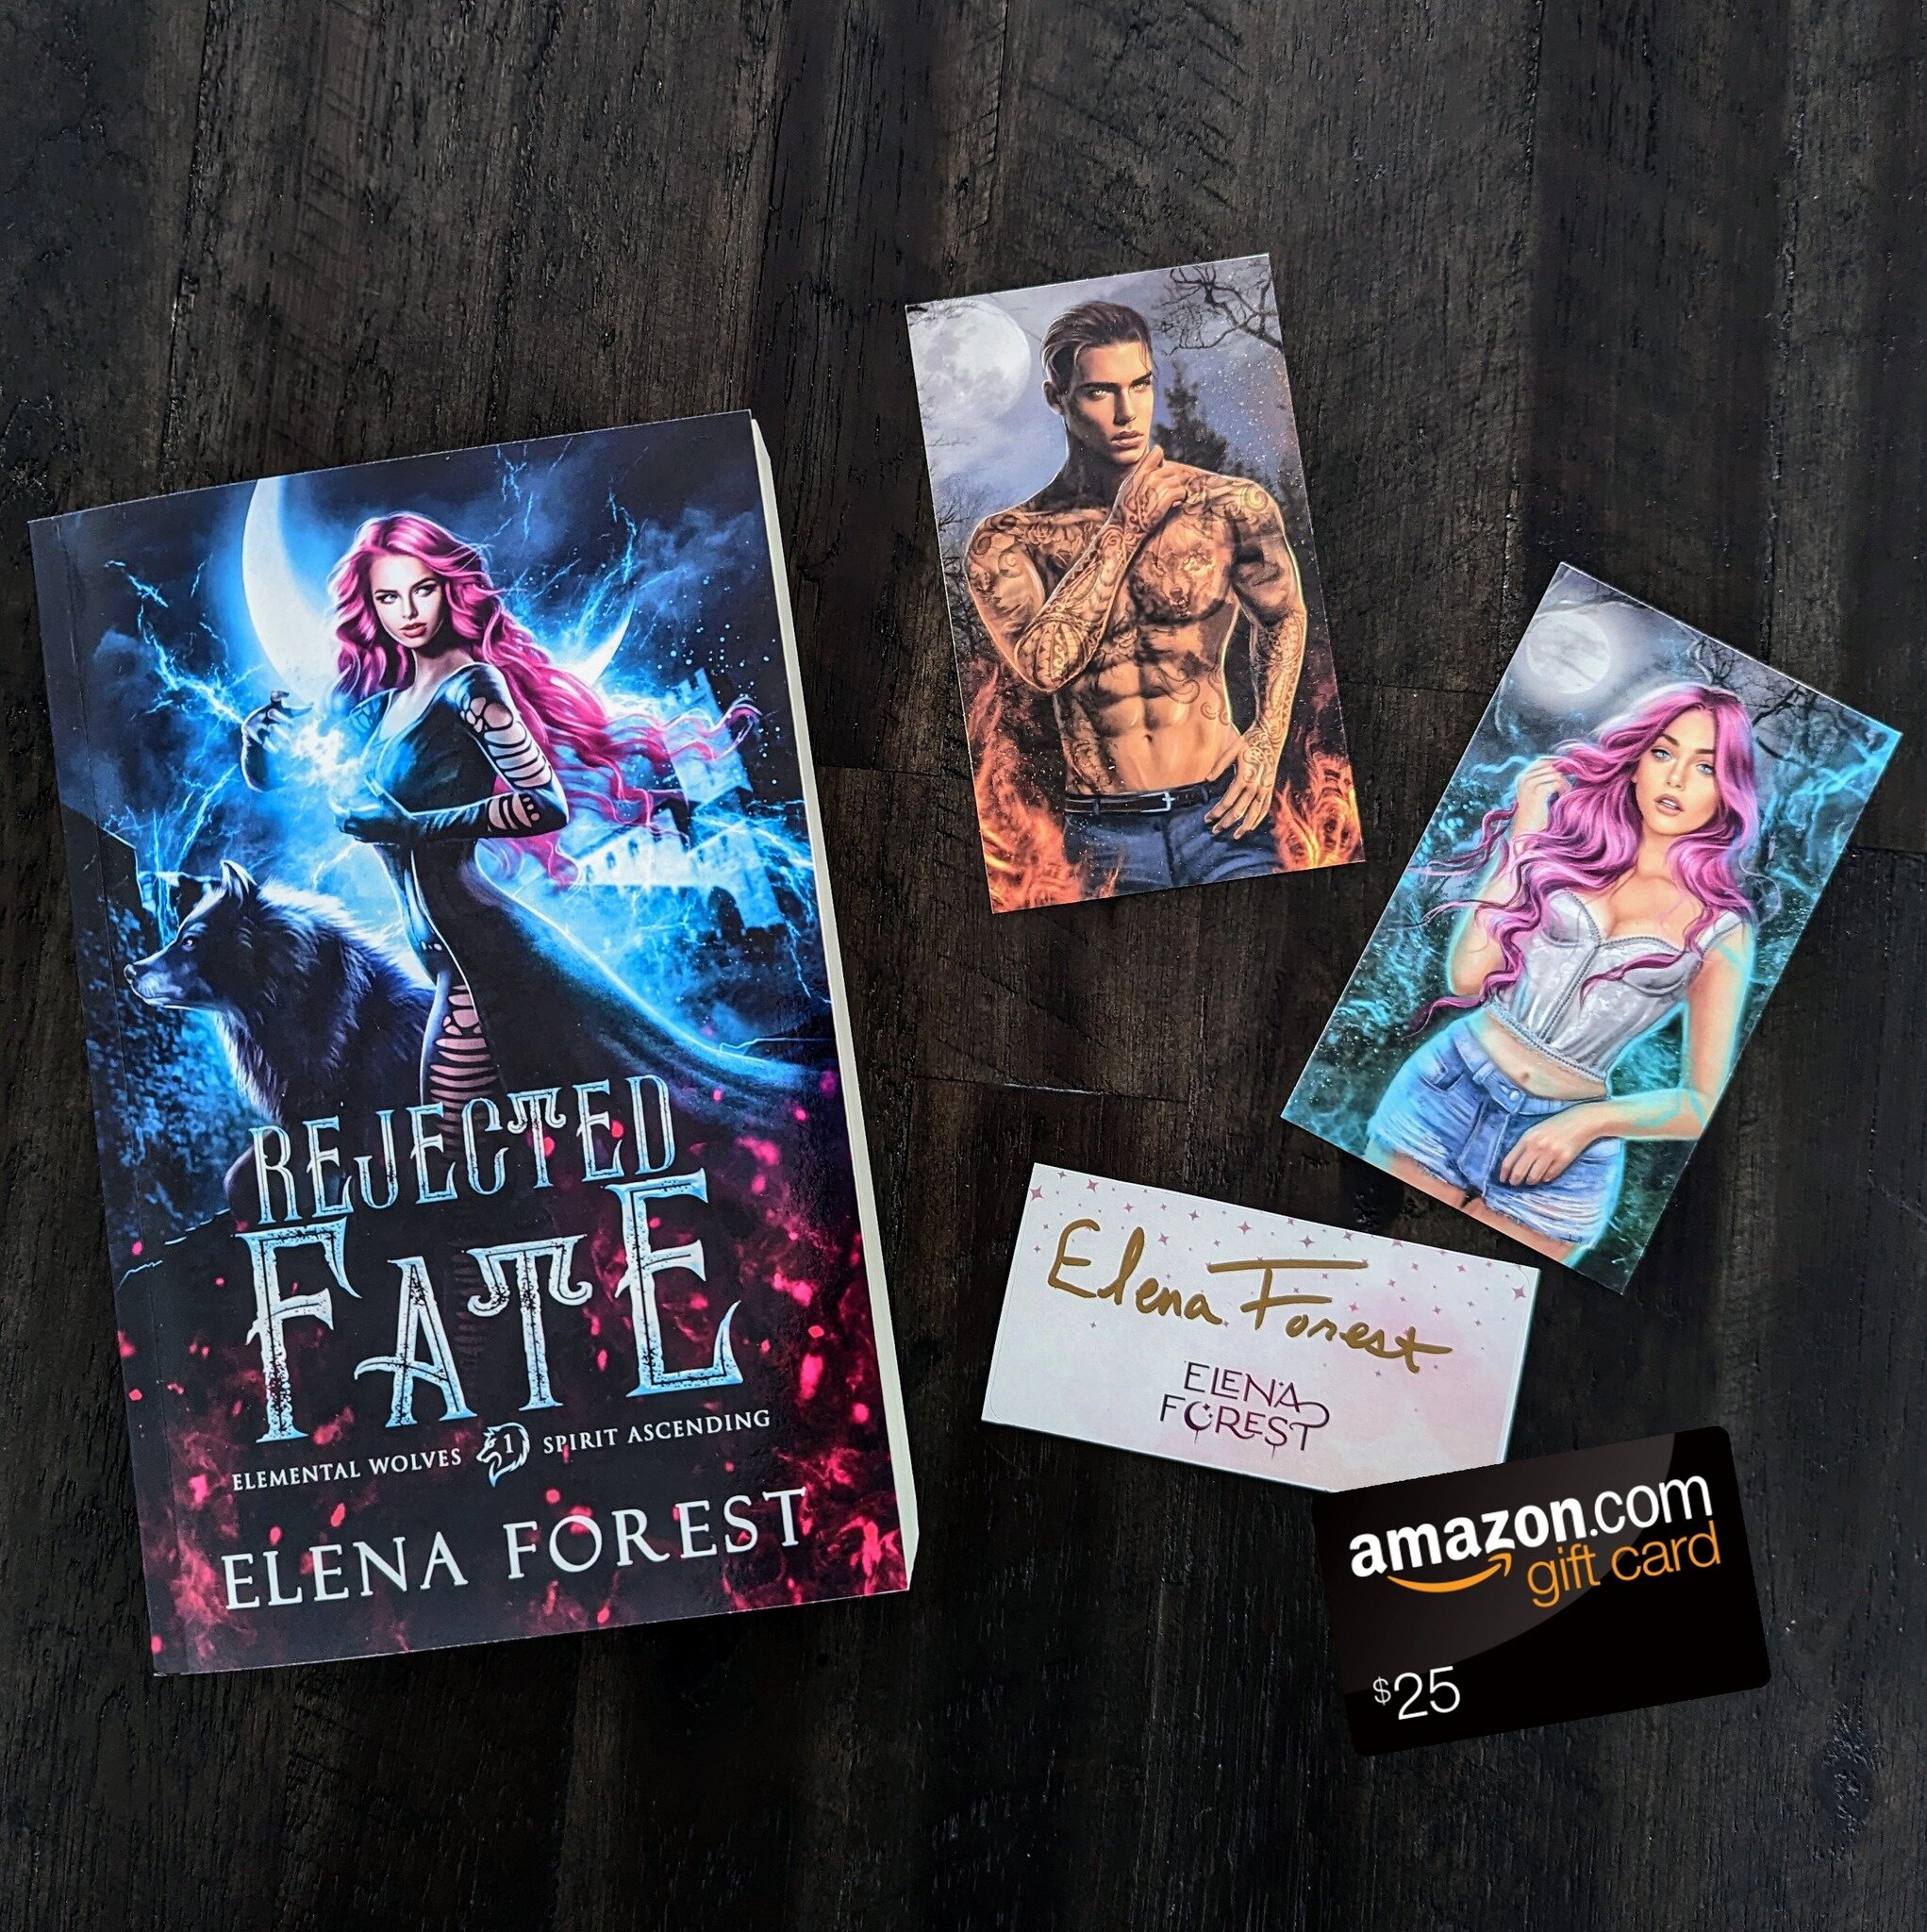 ✨ GIVEAWAY! ✨
If you're interested in winning a signed paperback of Rejected Fate, two premium character cards, a signed bookplate, and a $25 Amazon Gift Card, the link to my giveaway is in my bio! 

https://geni.us/rfgiveaway

#giveaway #rejectedfat